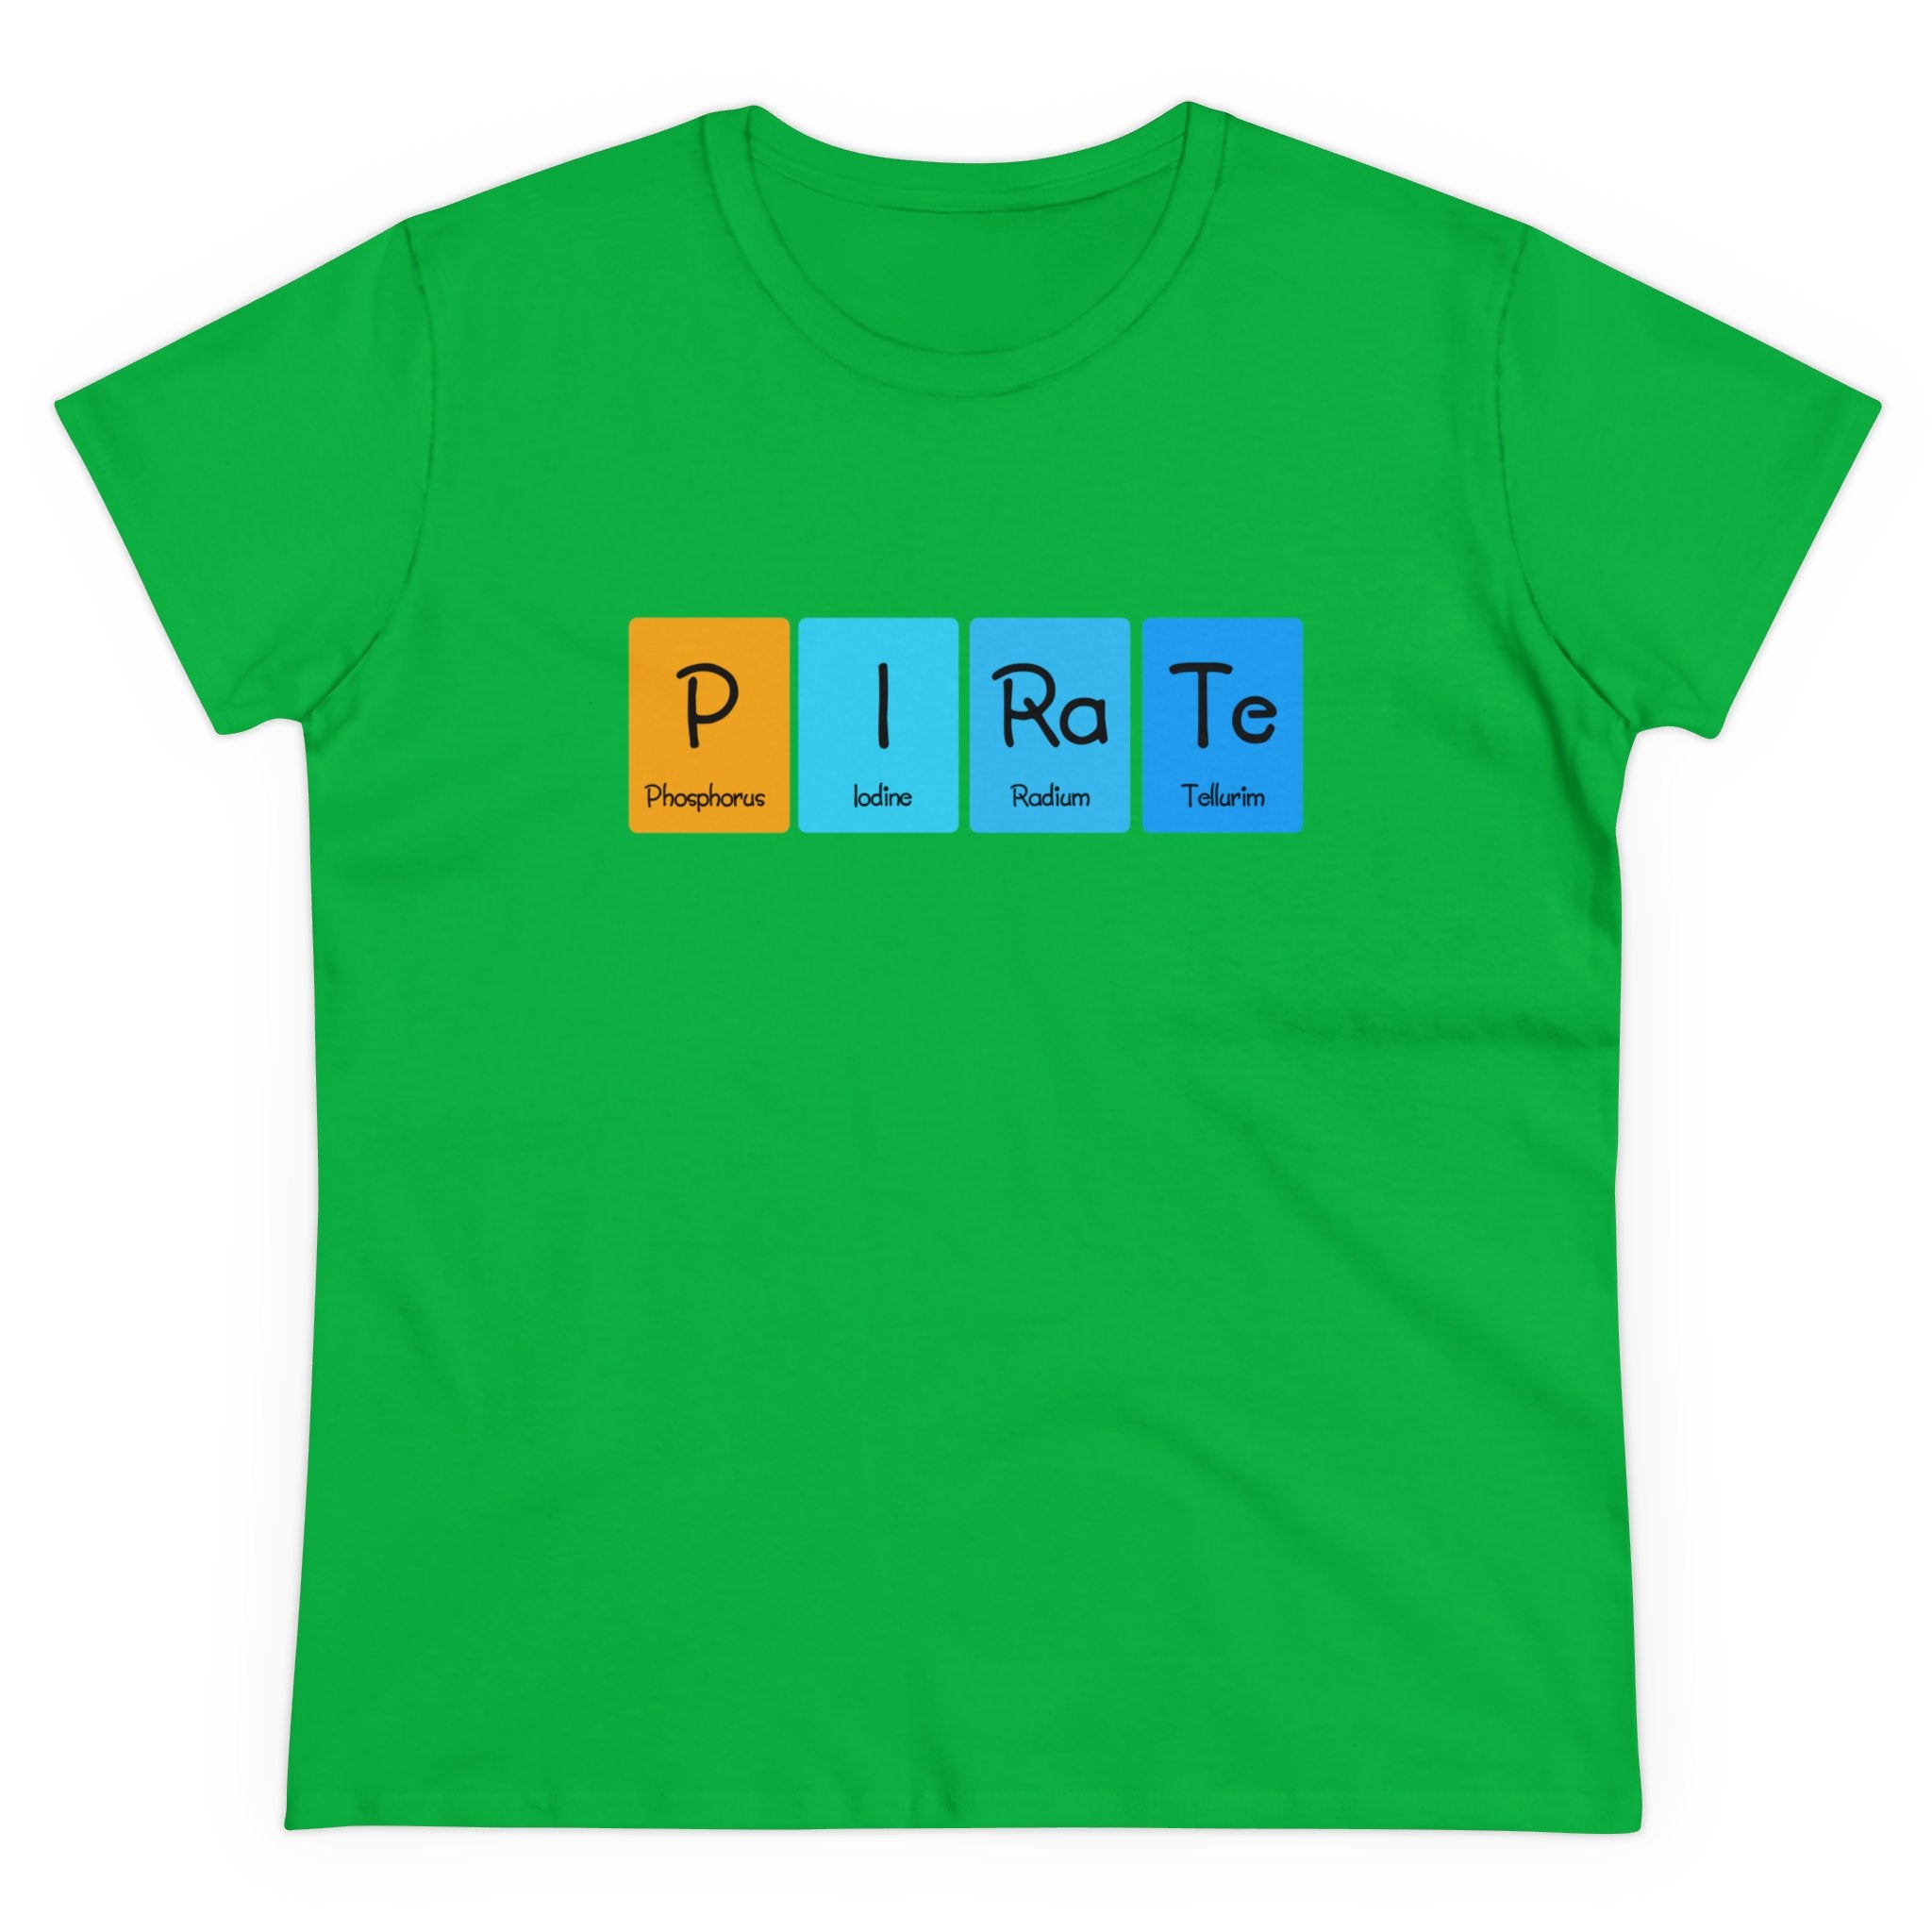 A trendy green P-I-Ra-Te - Women's Tee featuring a design with the word "PIRATE" spelled using elements from the periodic table: Phosphorus, Iodine, Radium, and Tellurium. Made from ethically grown cotton for both style and sustainability.